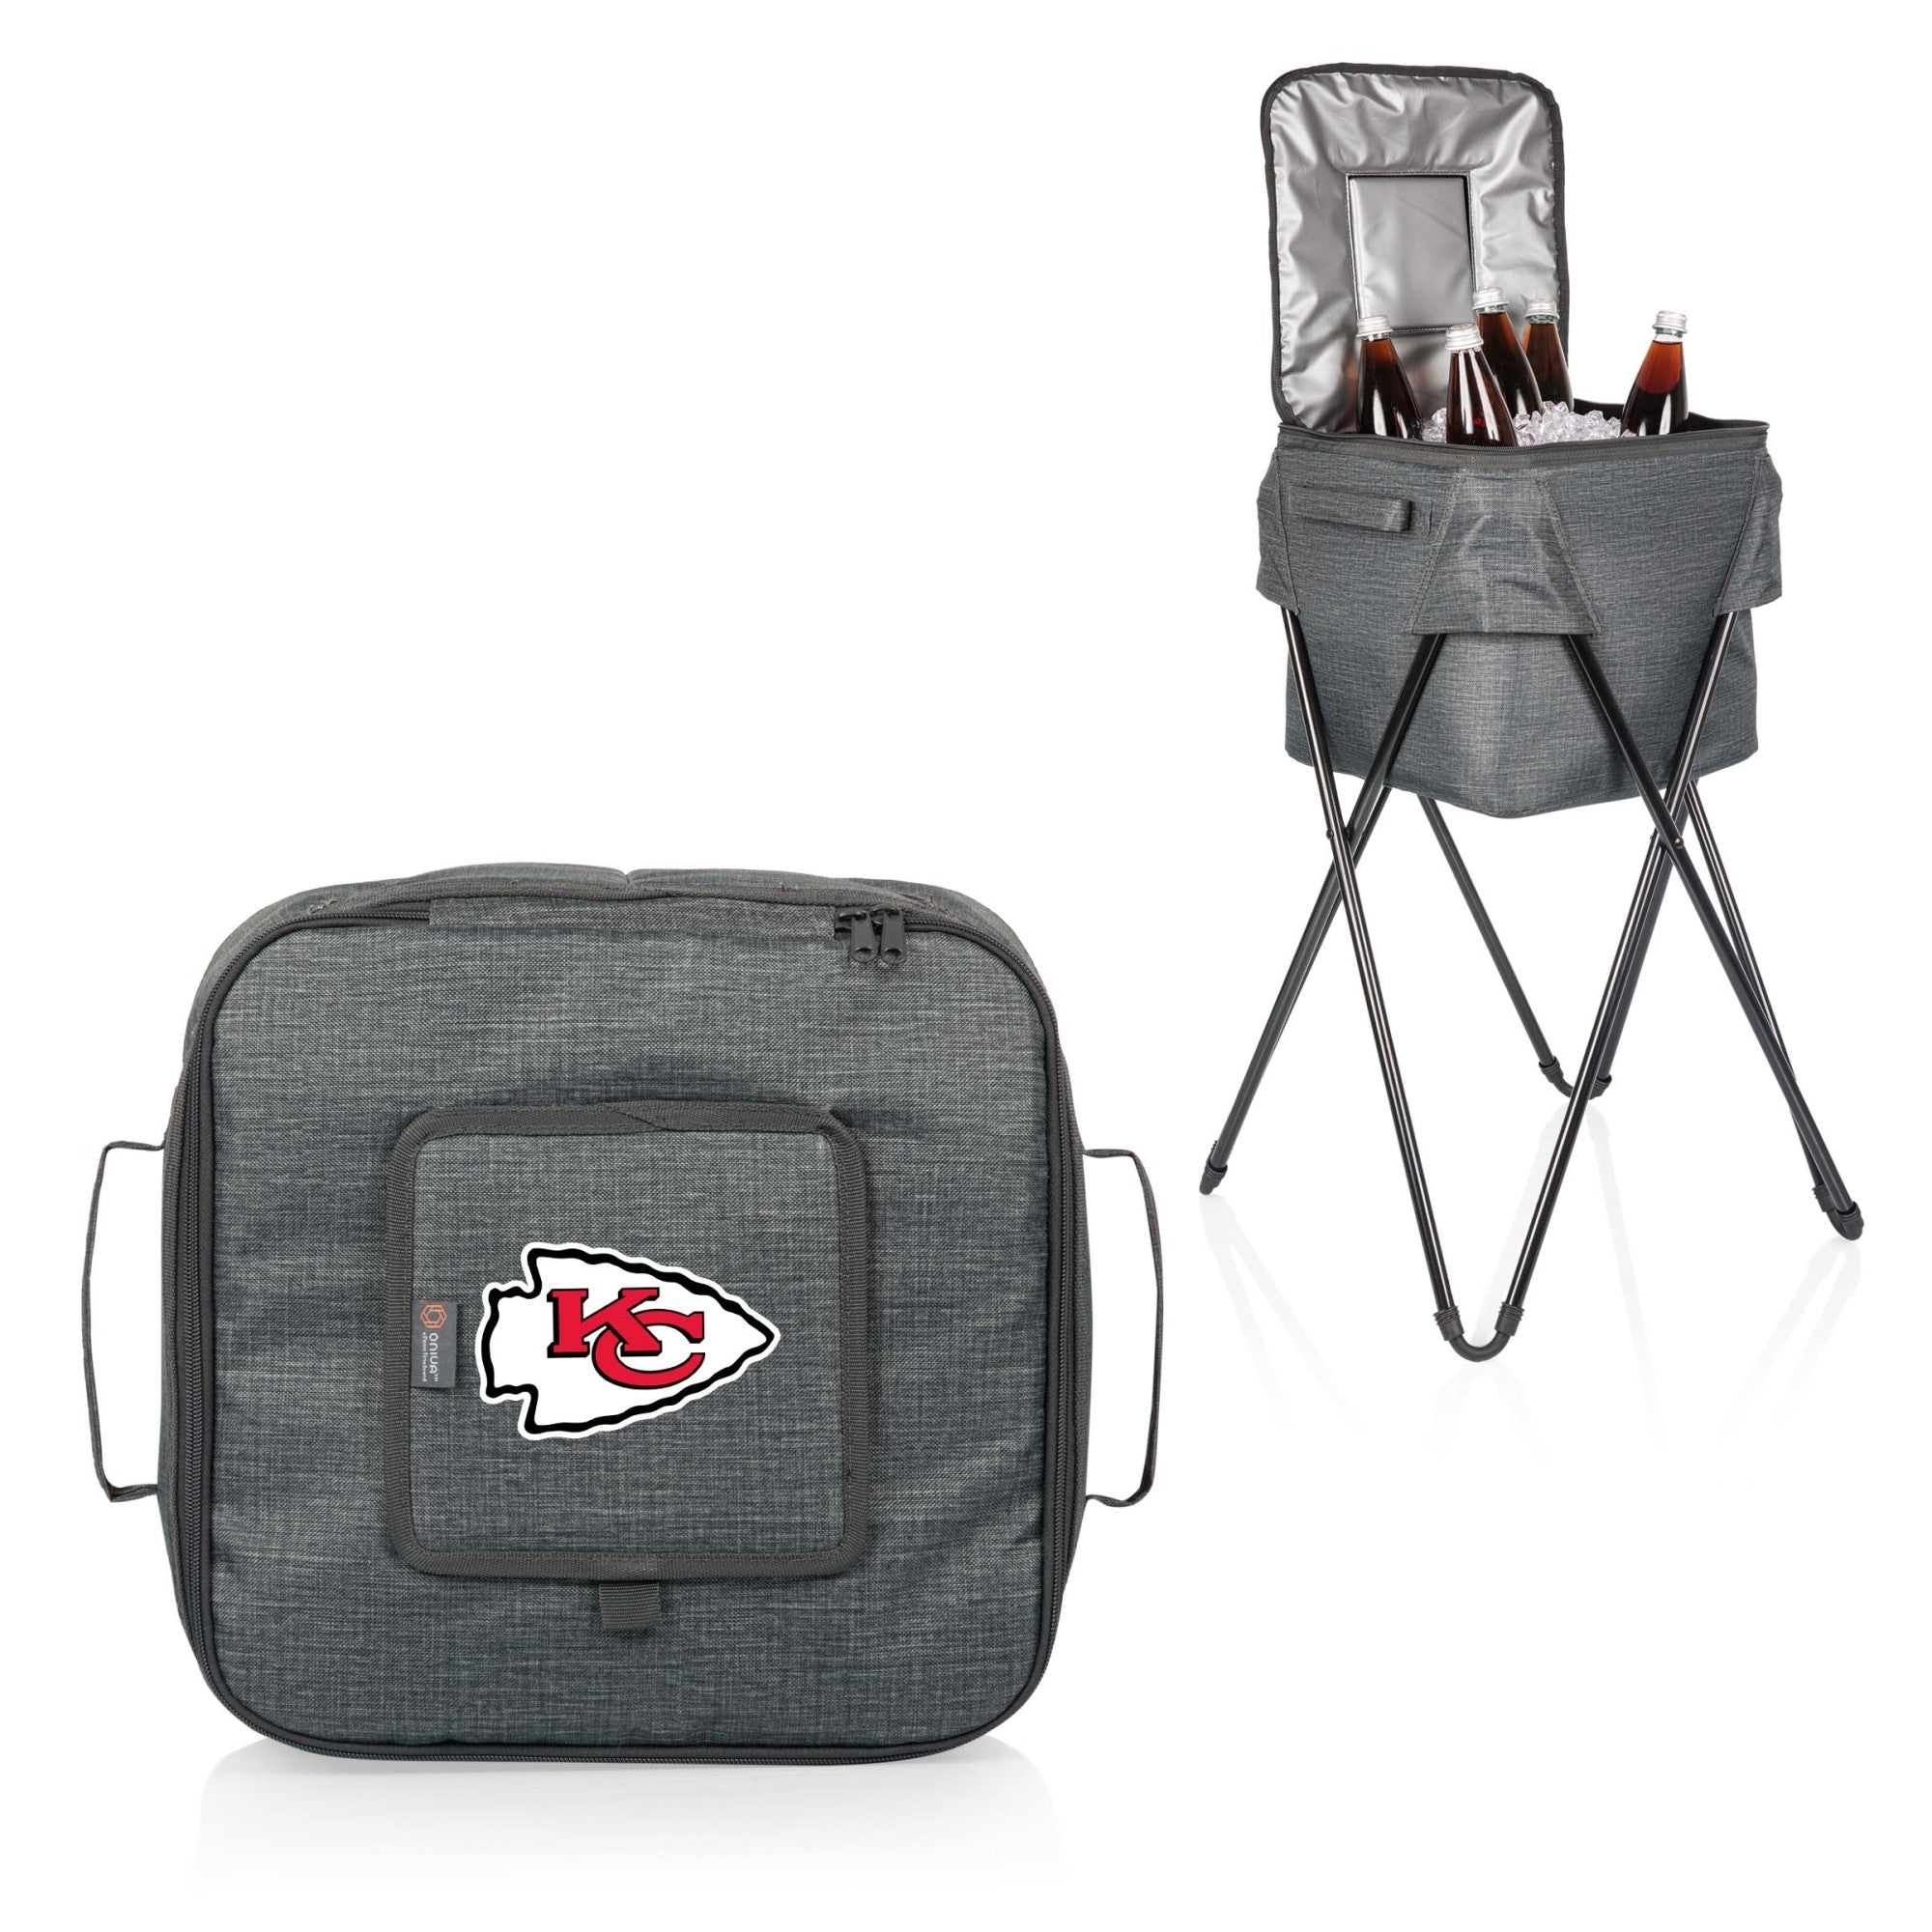 Kansas City Chiefs - Camping Party Cooler with Stand, (Heathered Gray)